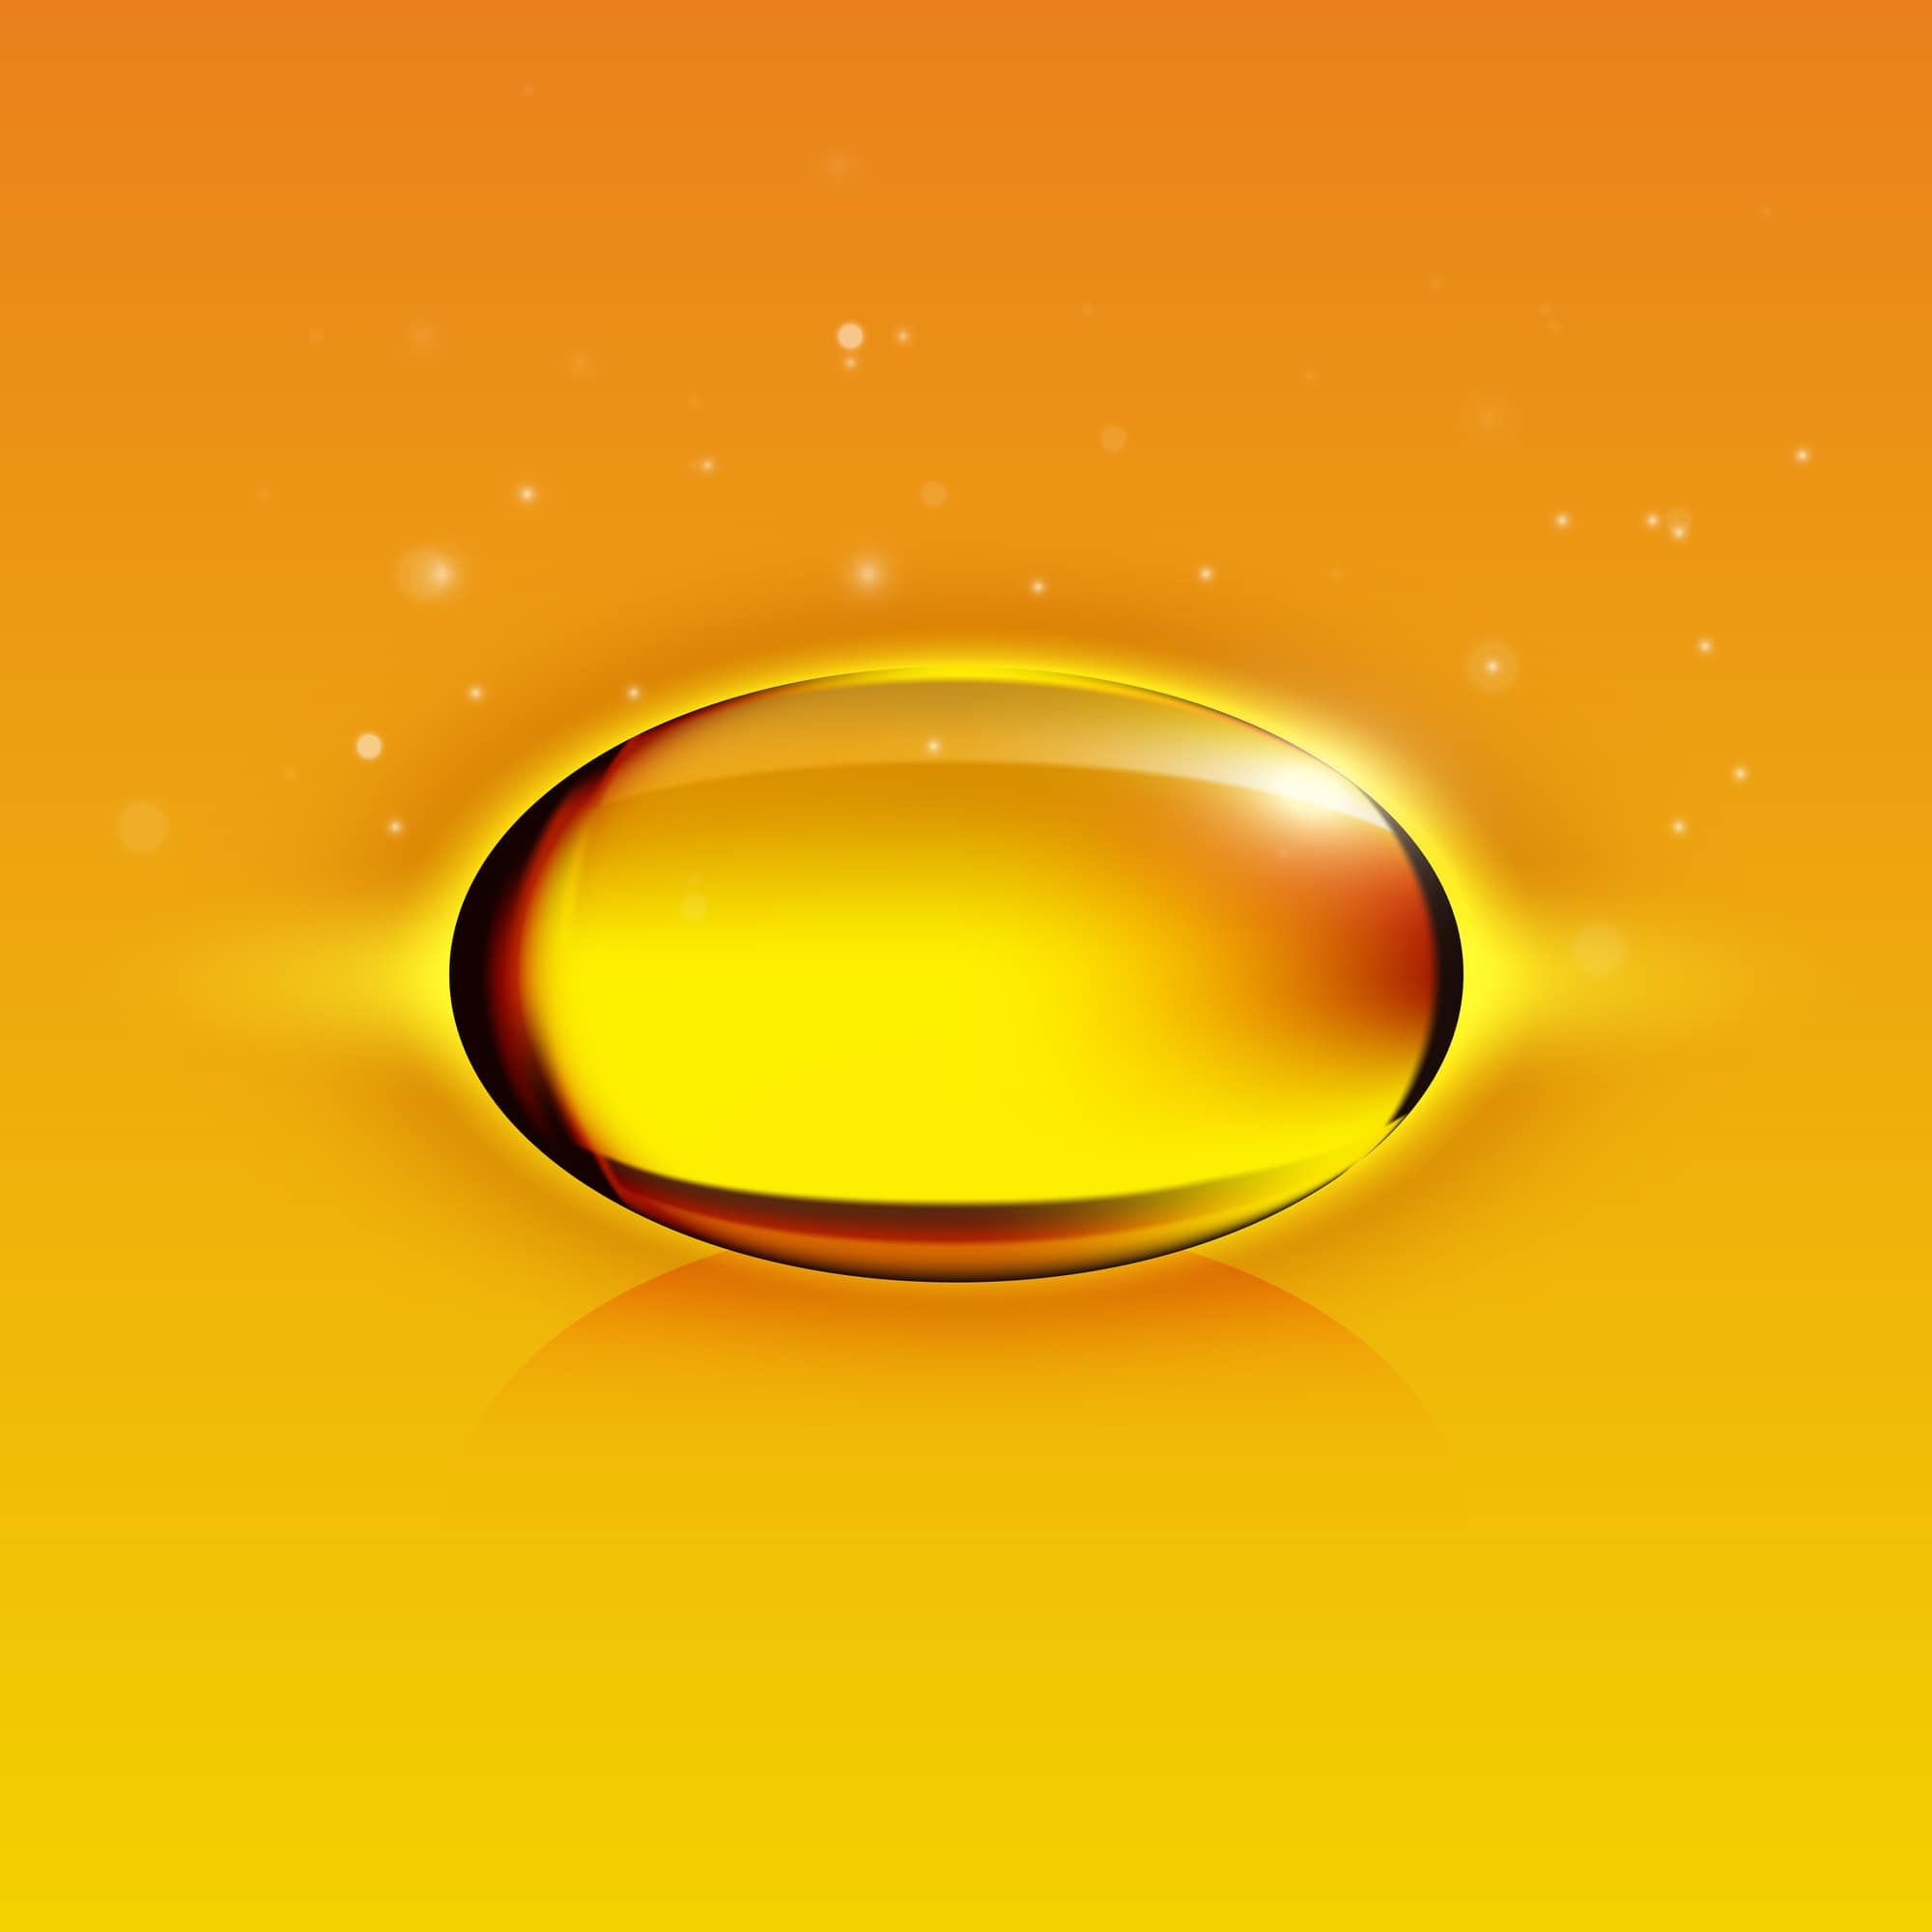 ACGrace - A yellow vitamin capsule on an orange background.